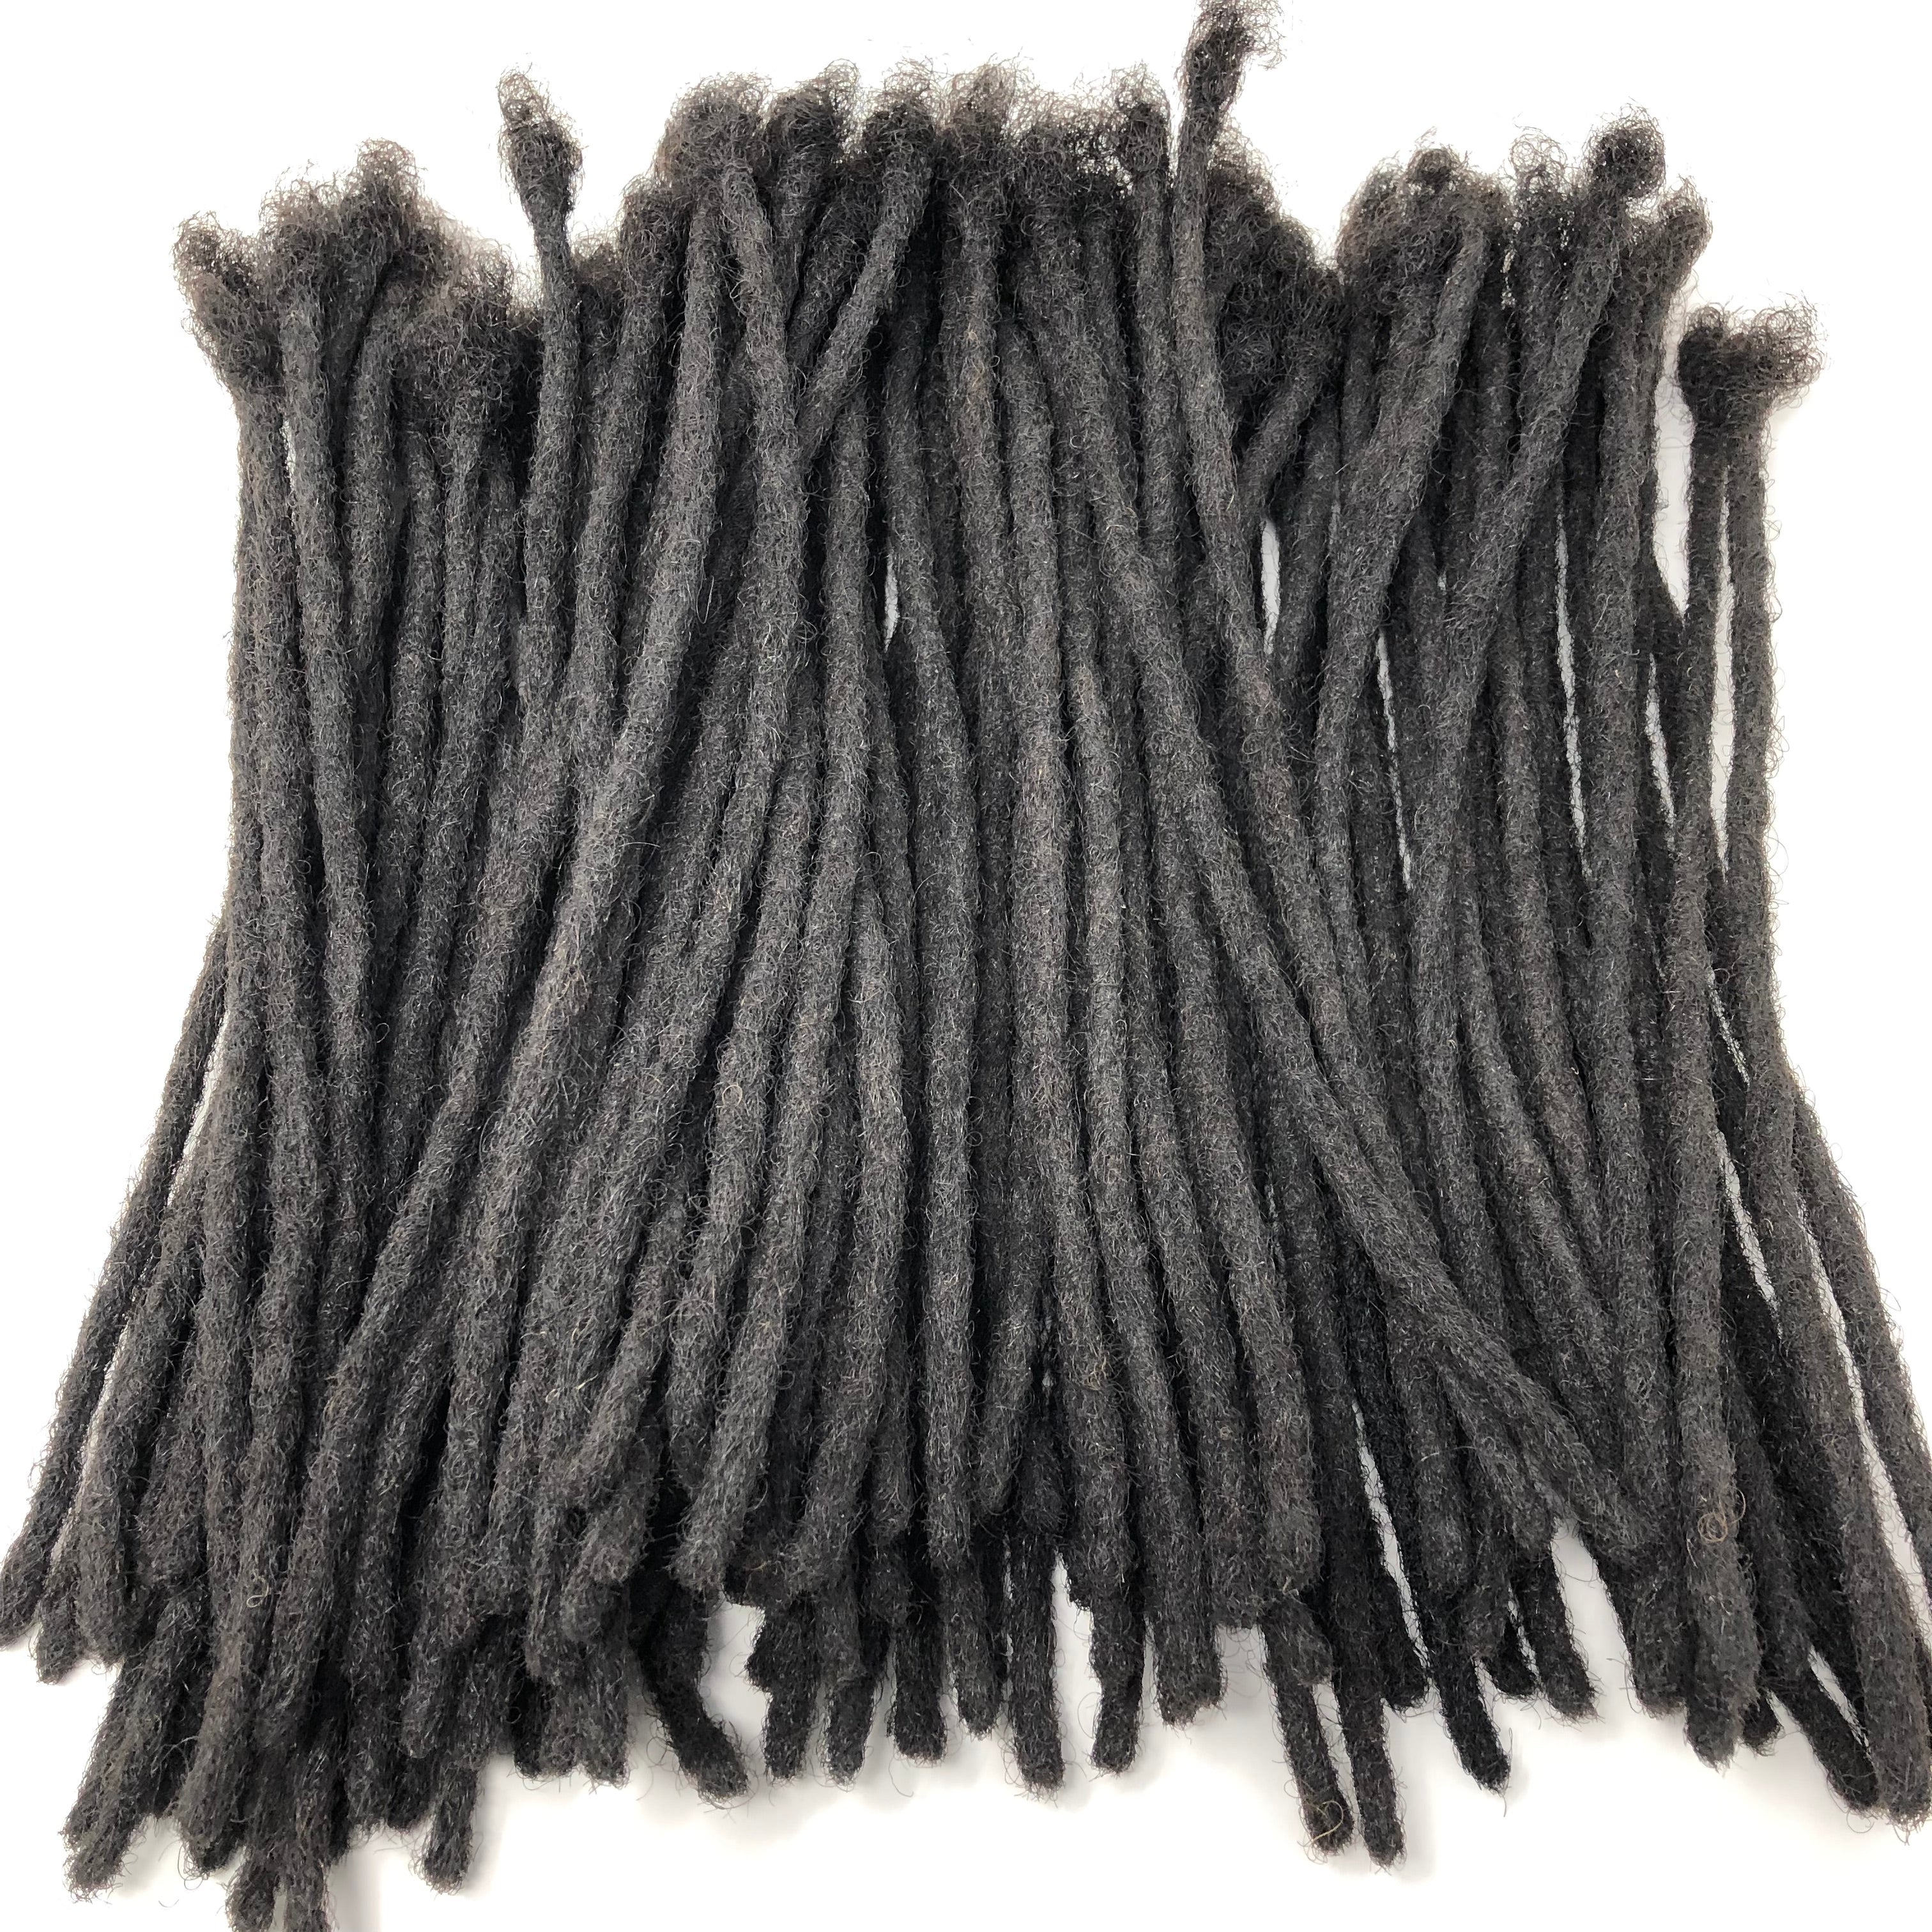 What Hair Products do you recommend for dreads : r/Dreadlocks